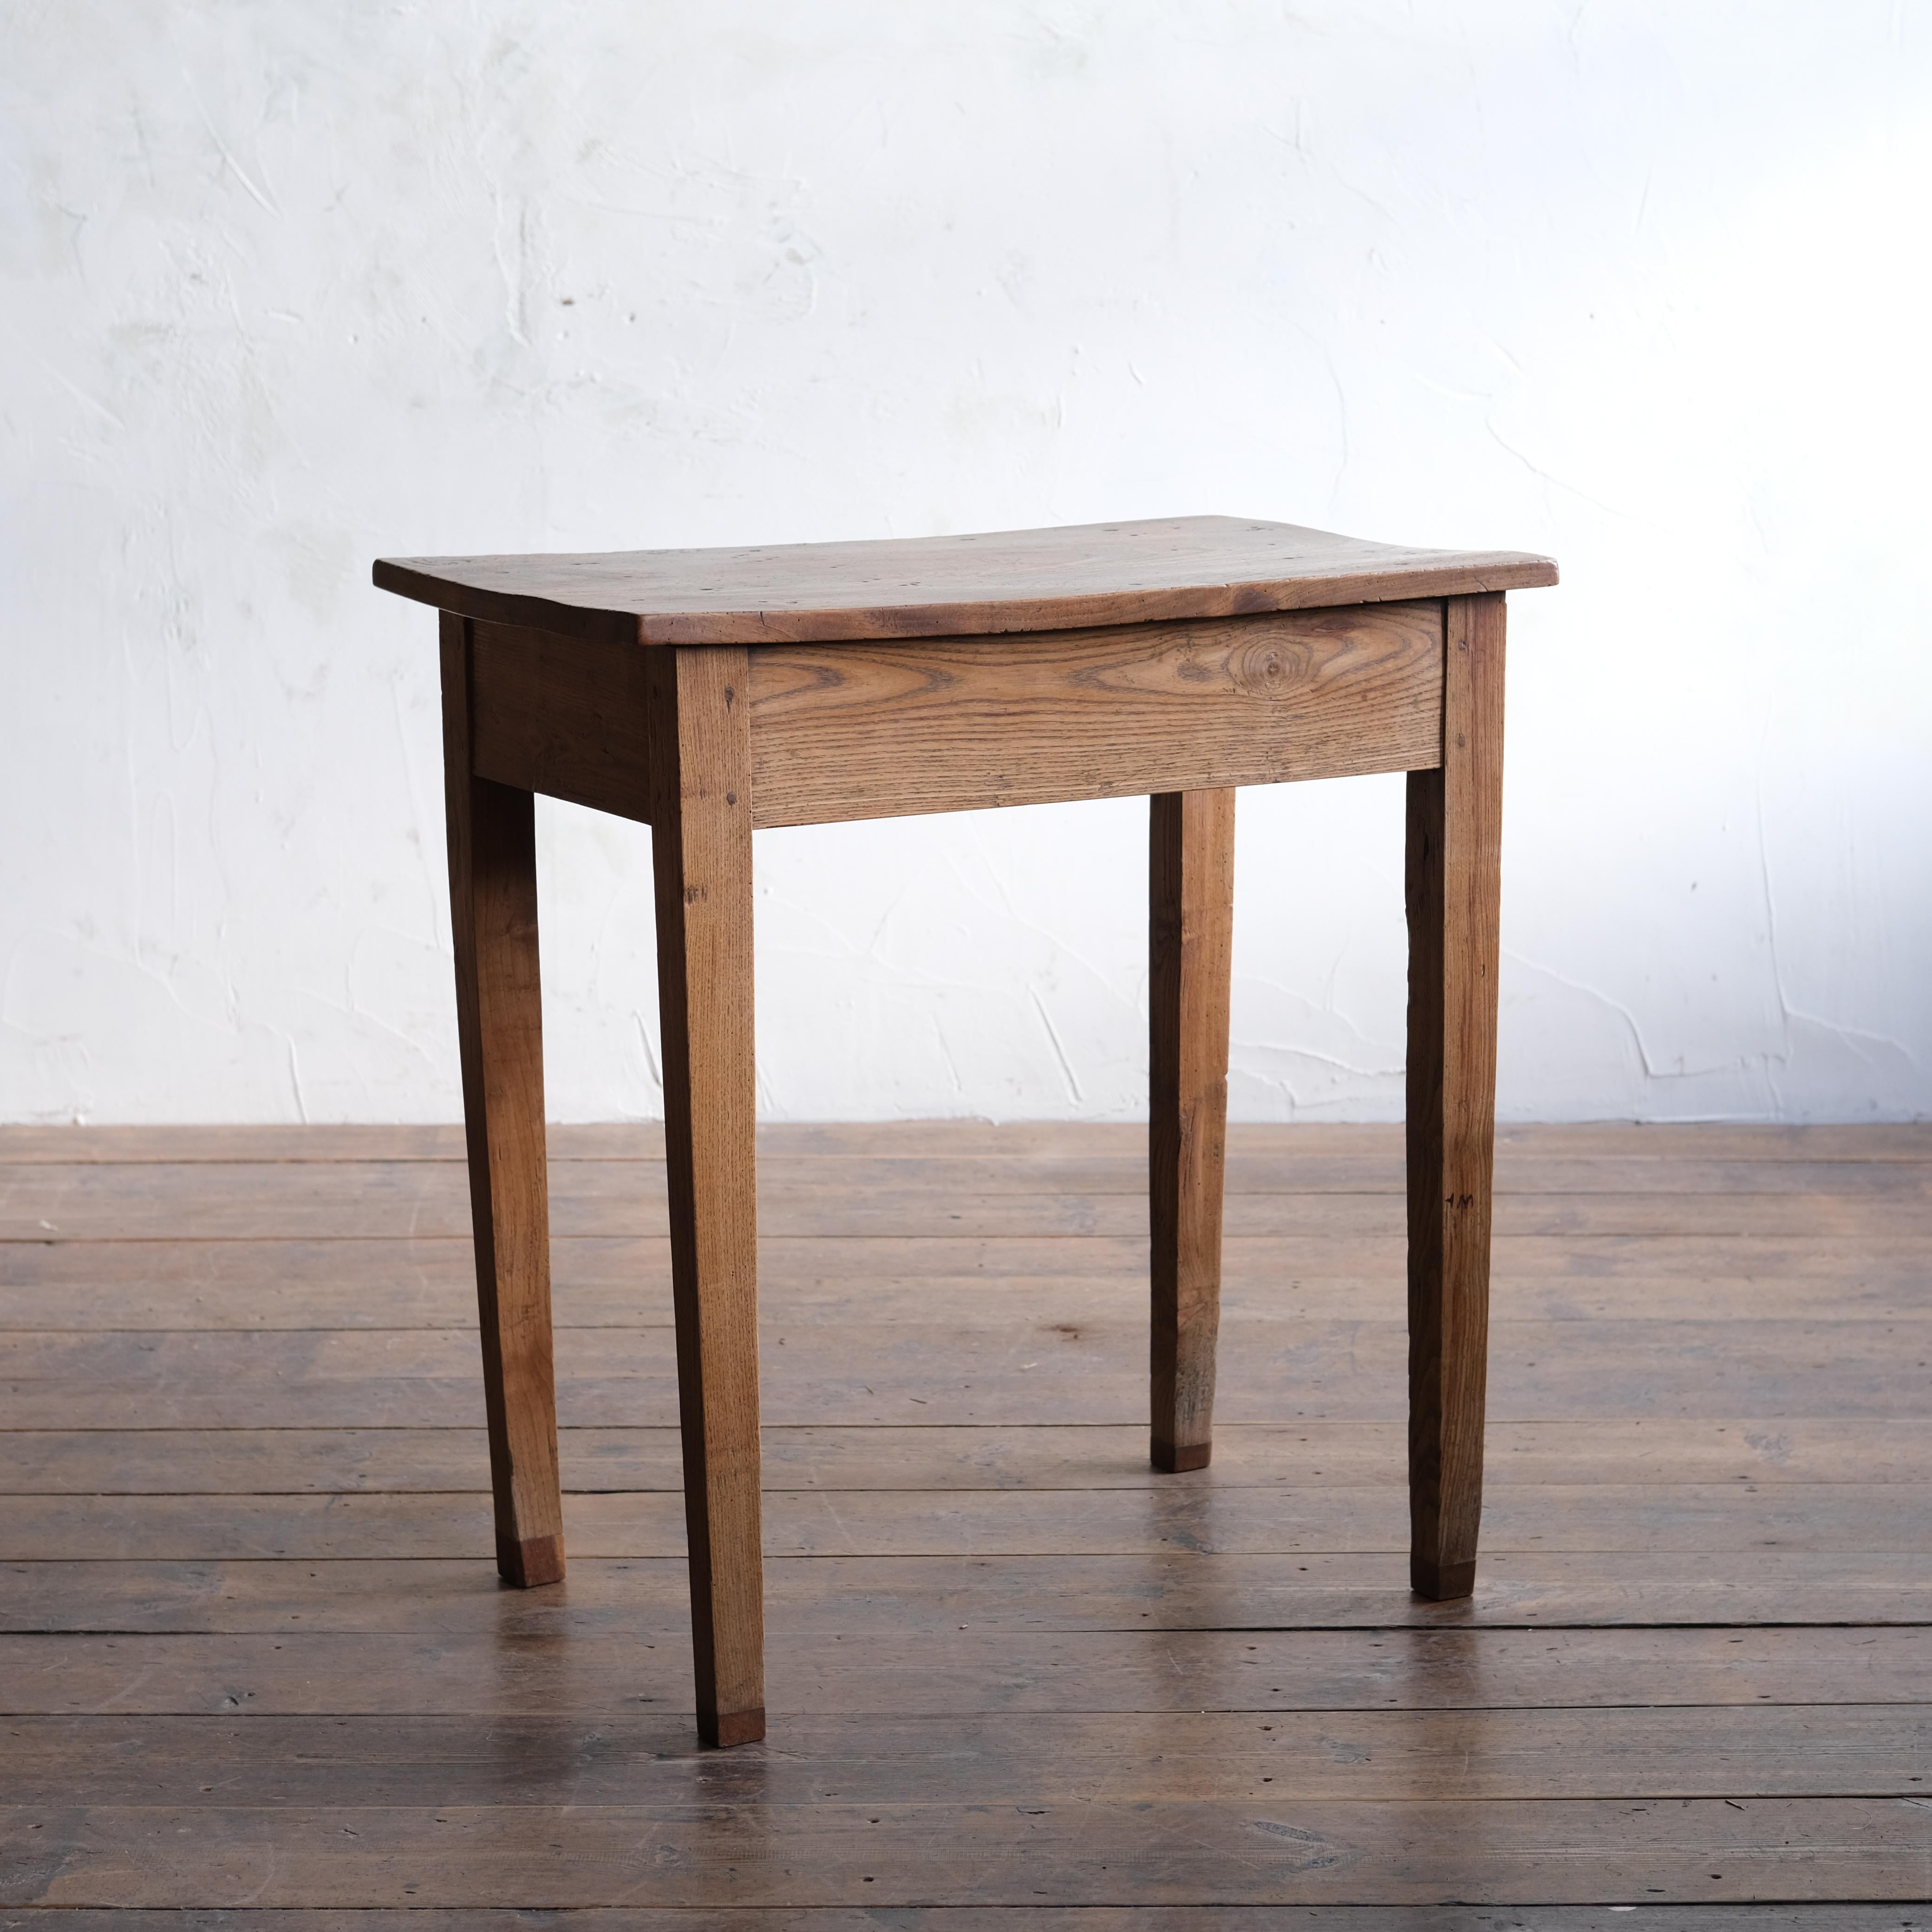 A characterful elm side table with single piece elm top. It seems someone may have used it at some point as a dining table as pieces have been added to give it height, they can be removed if needed. 
47cm deep

72cm wide

78cm high

62cm knee